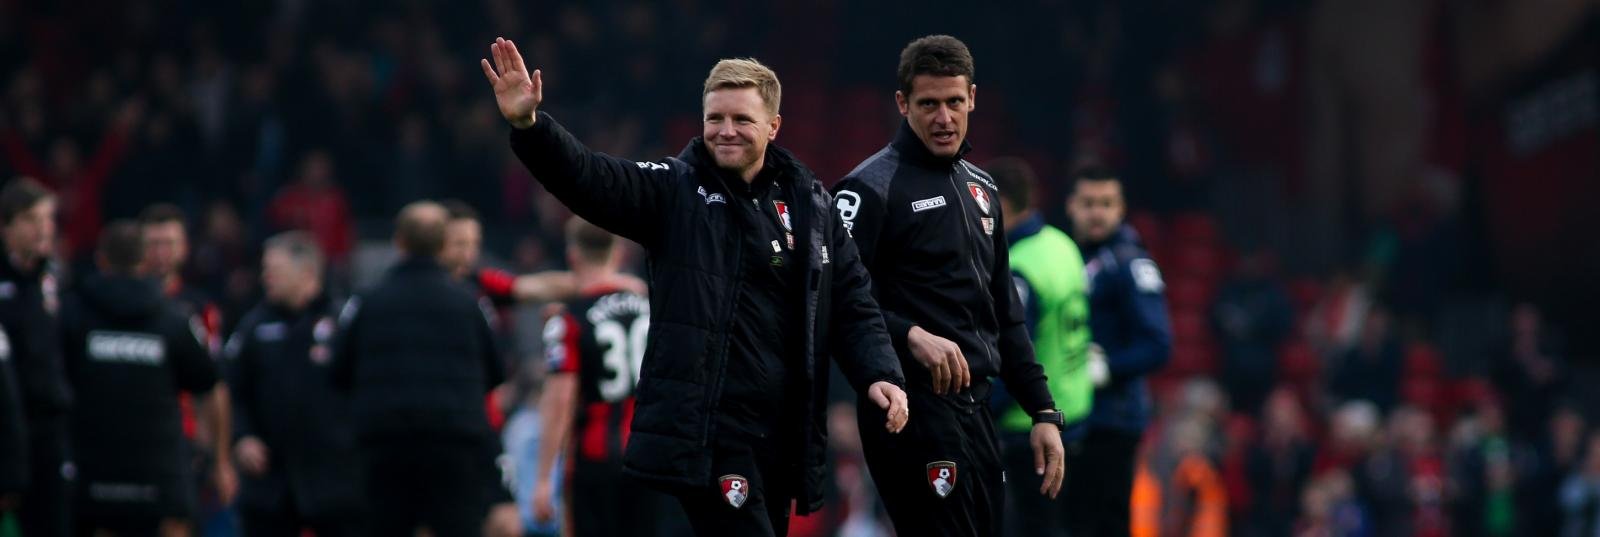 Defeat is no disaster for AFC Bournemouth